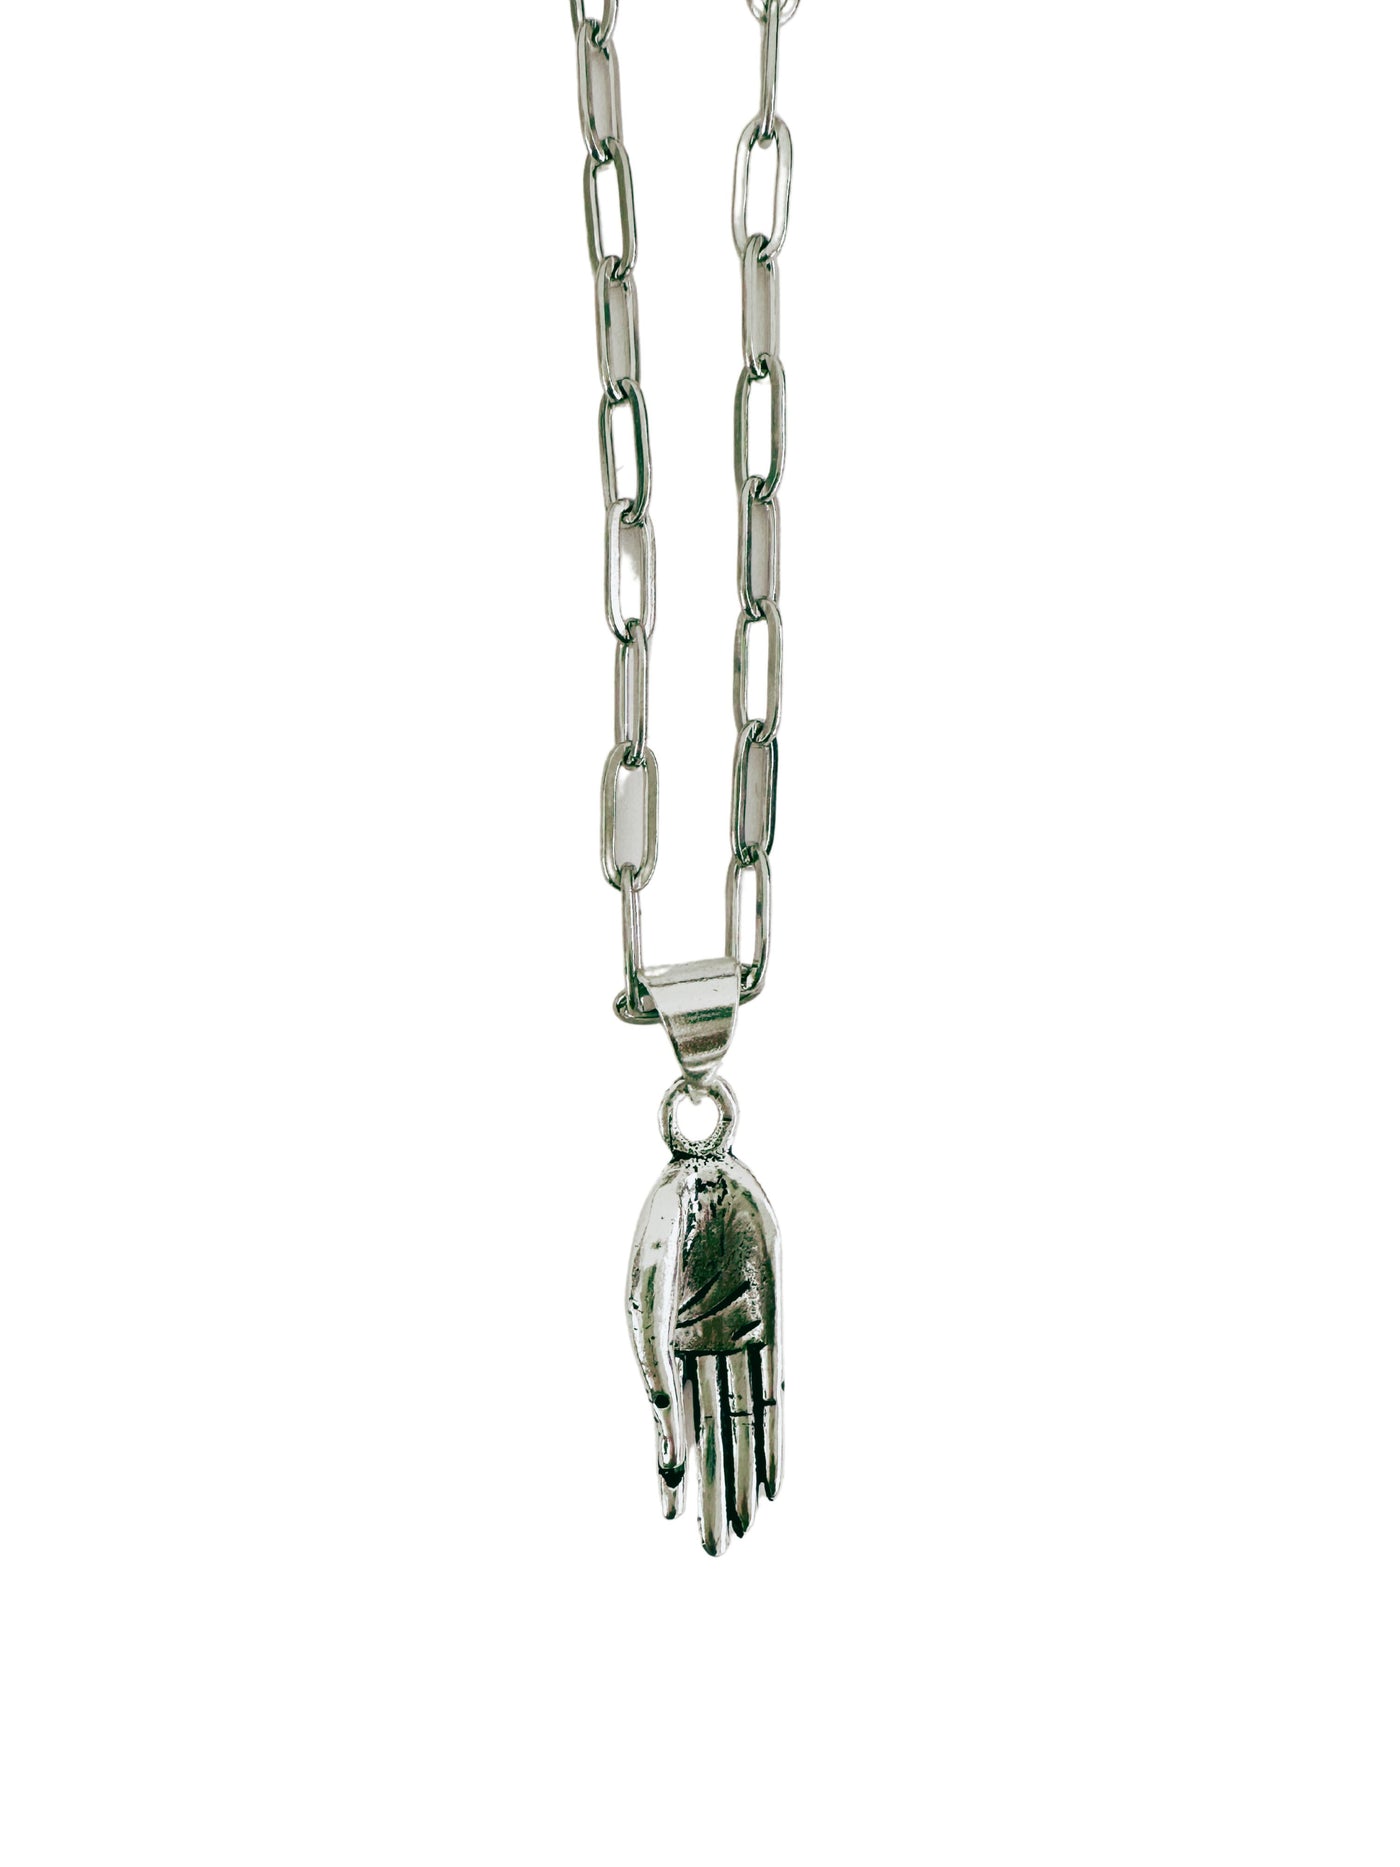 Mai blessing Hand Silver Necklace